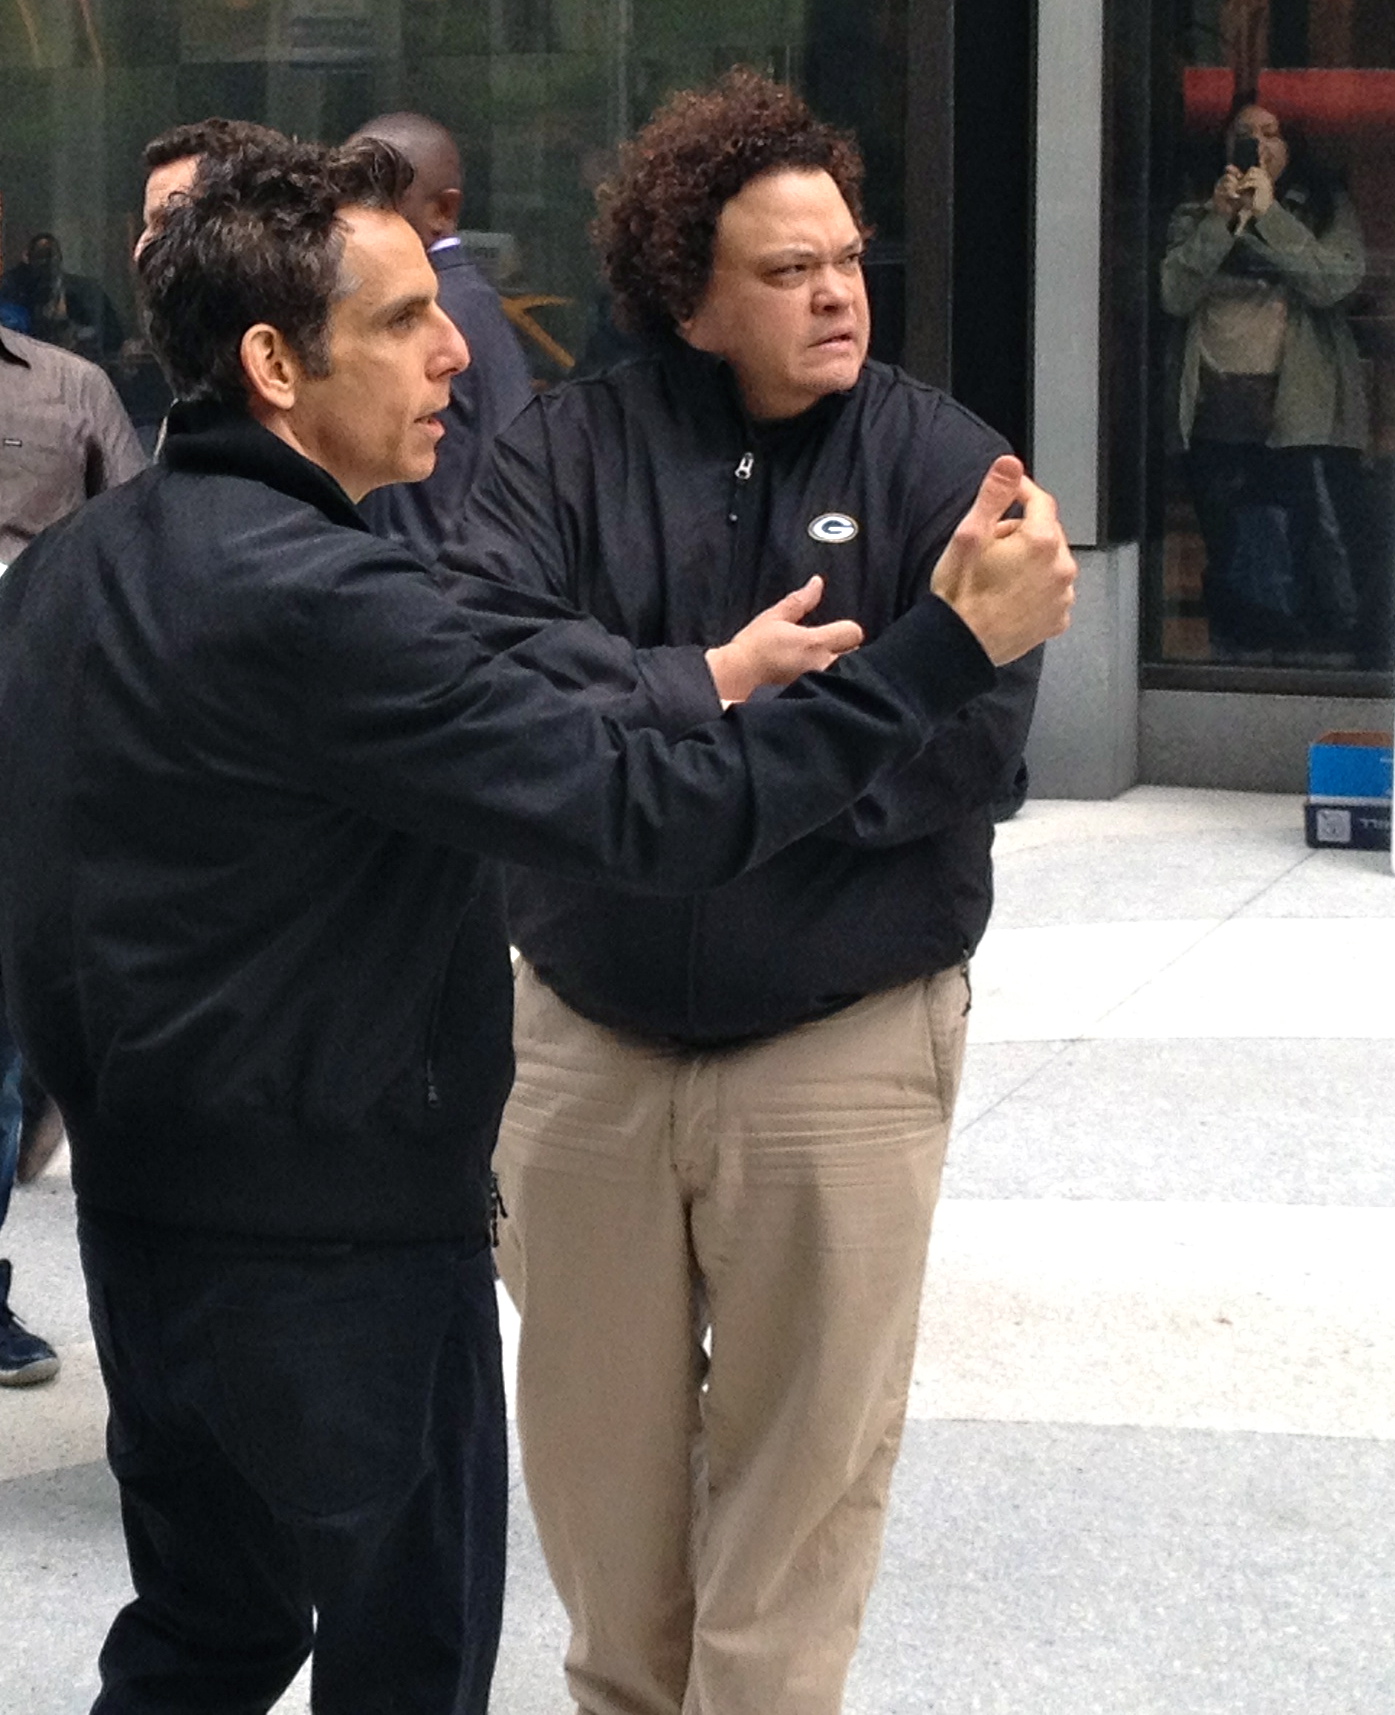 Rehearsing with the great Ben Stiller.